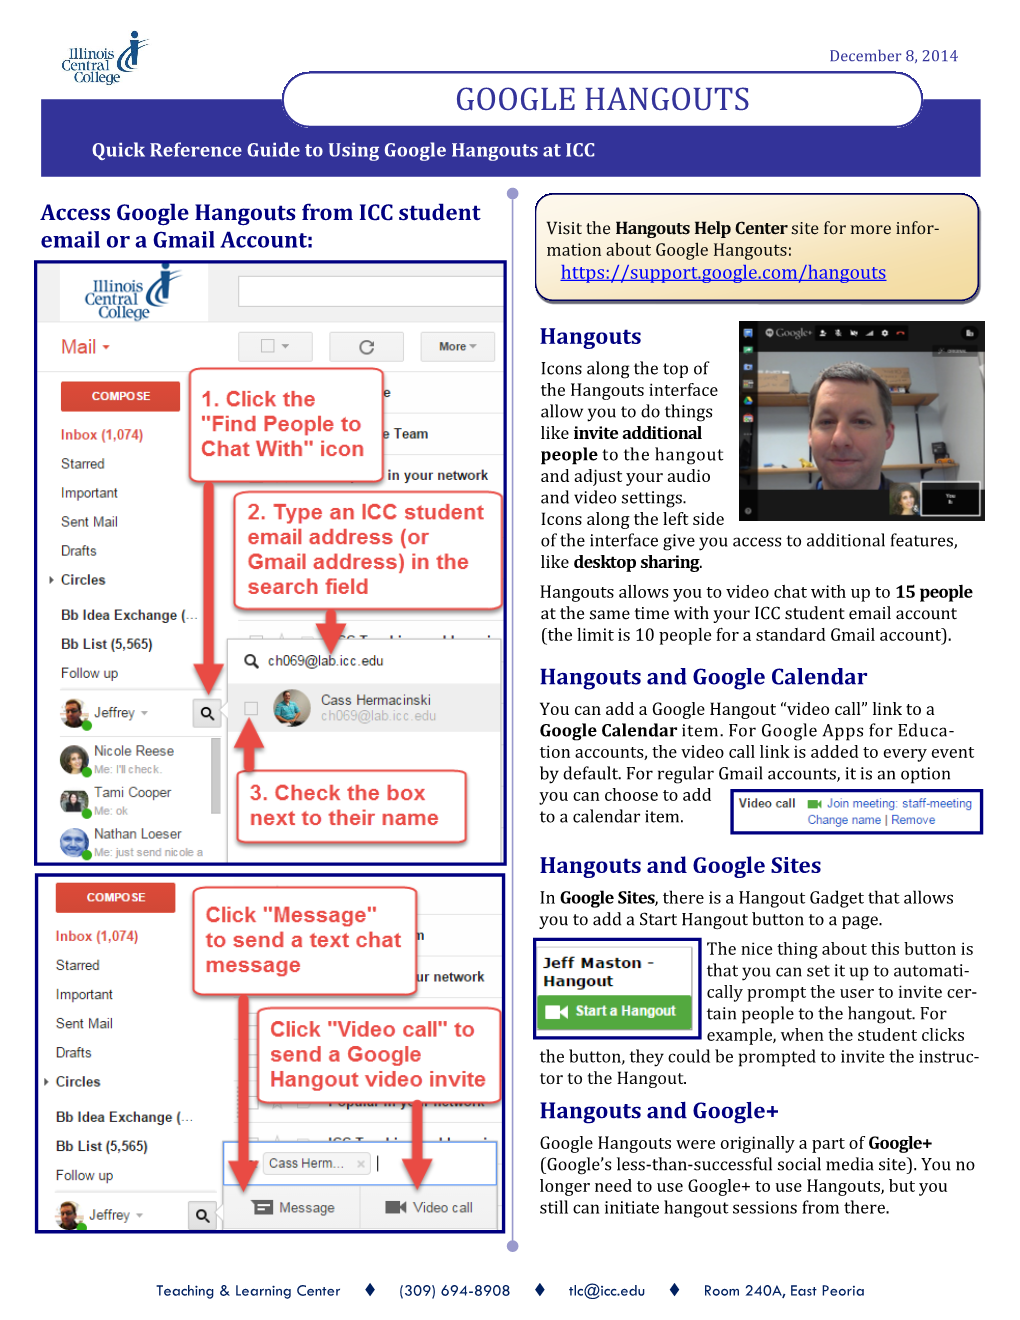 Quick Reference Guide to Using Google Hangouts at ICC